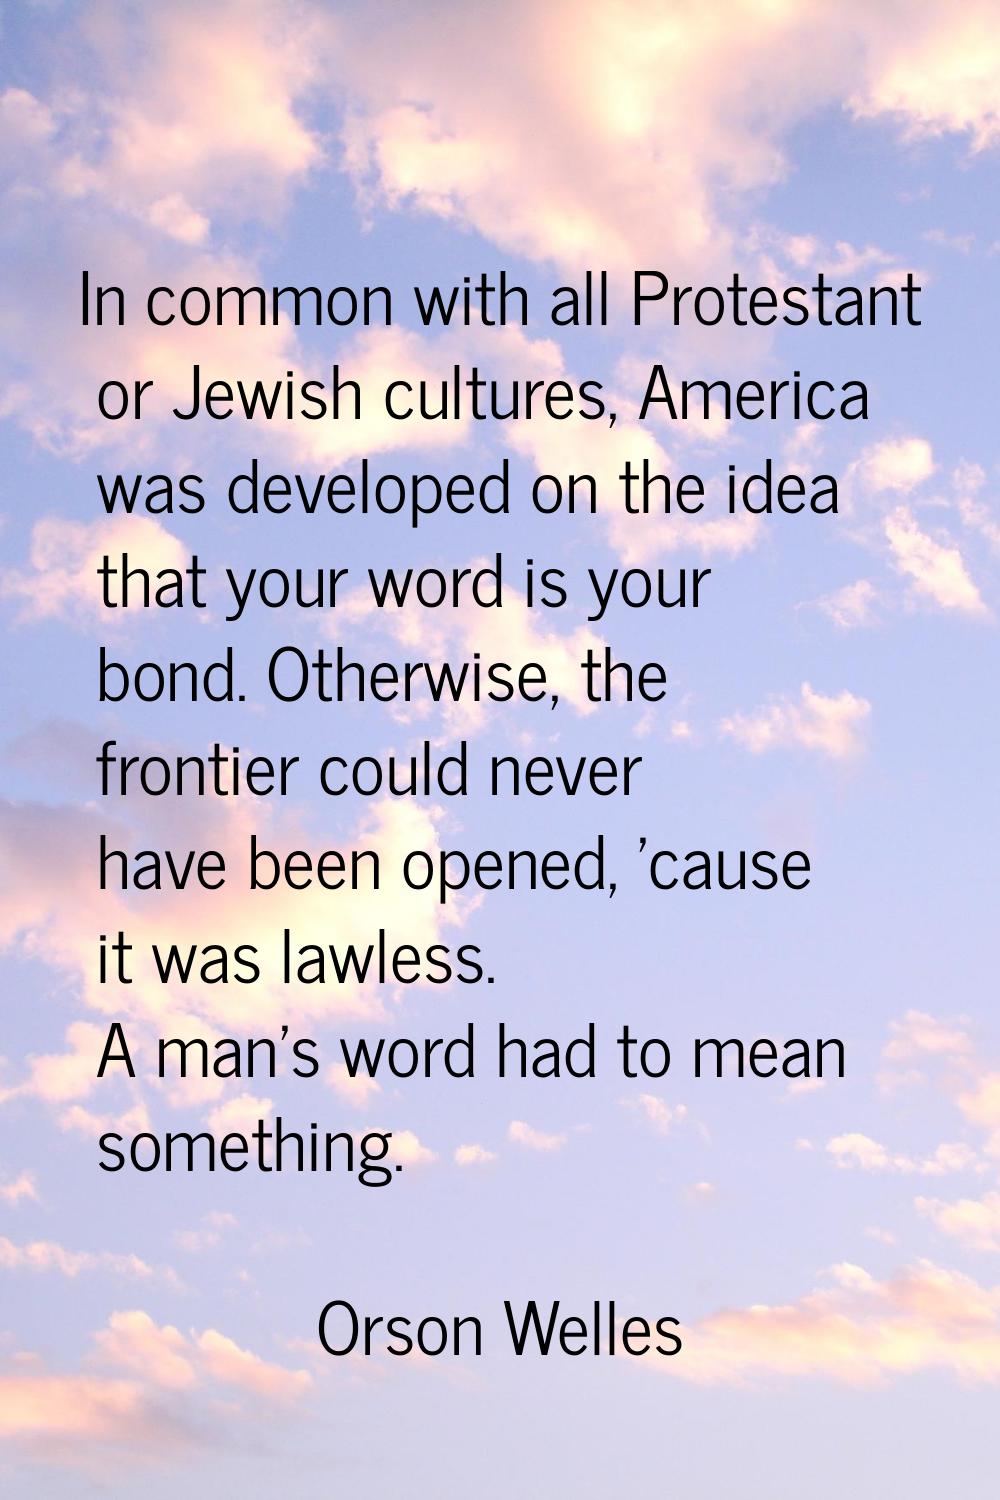 In common with all Protestant or Jewish cultures, America was developed on the idea that your word 